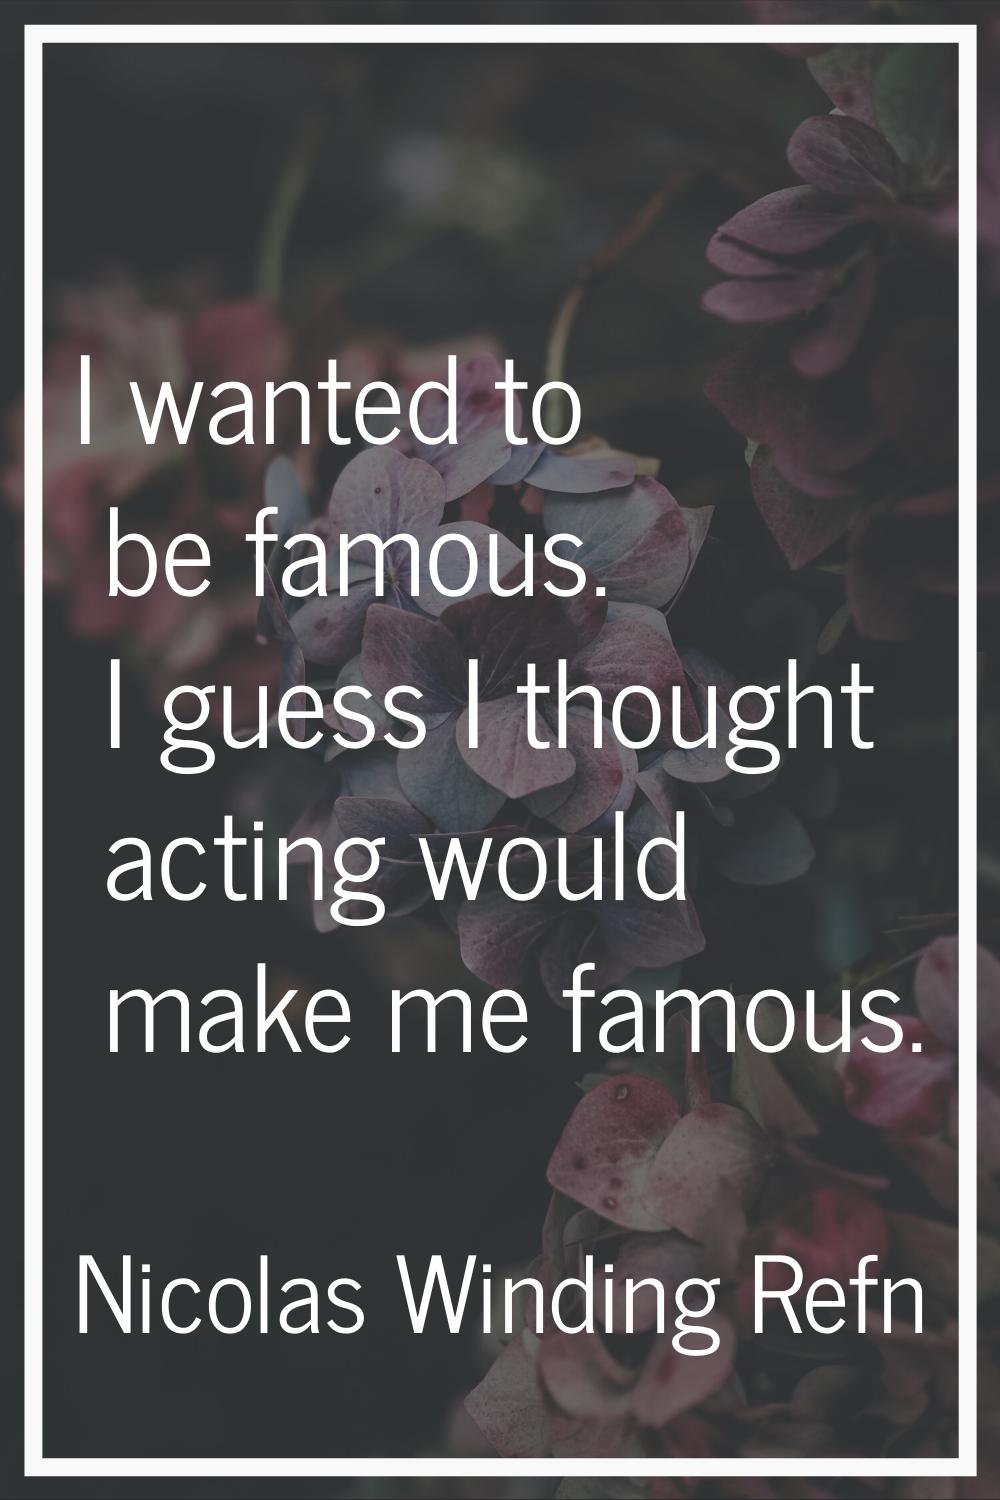 I wanted to be famous. I guess I thought acting would make me famous.